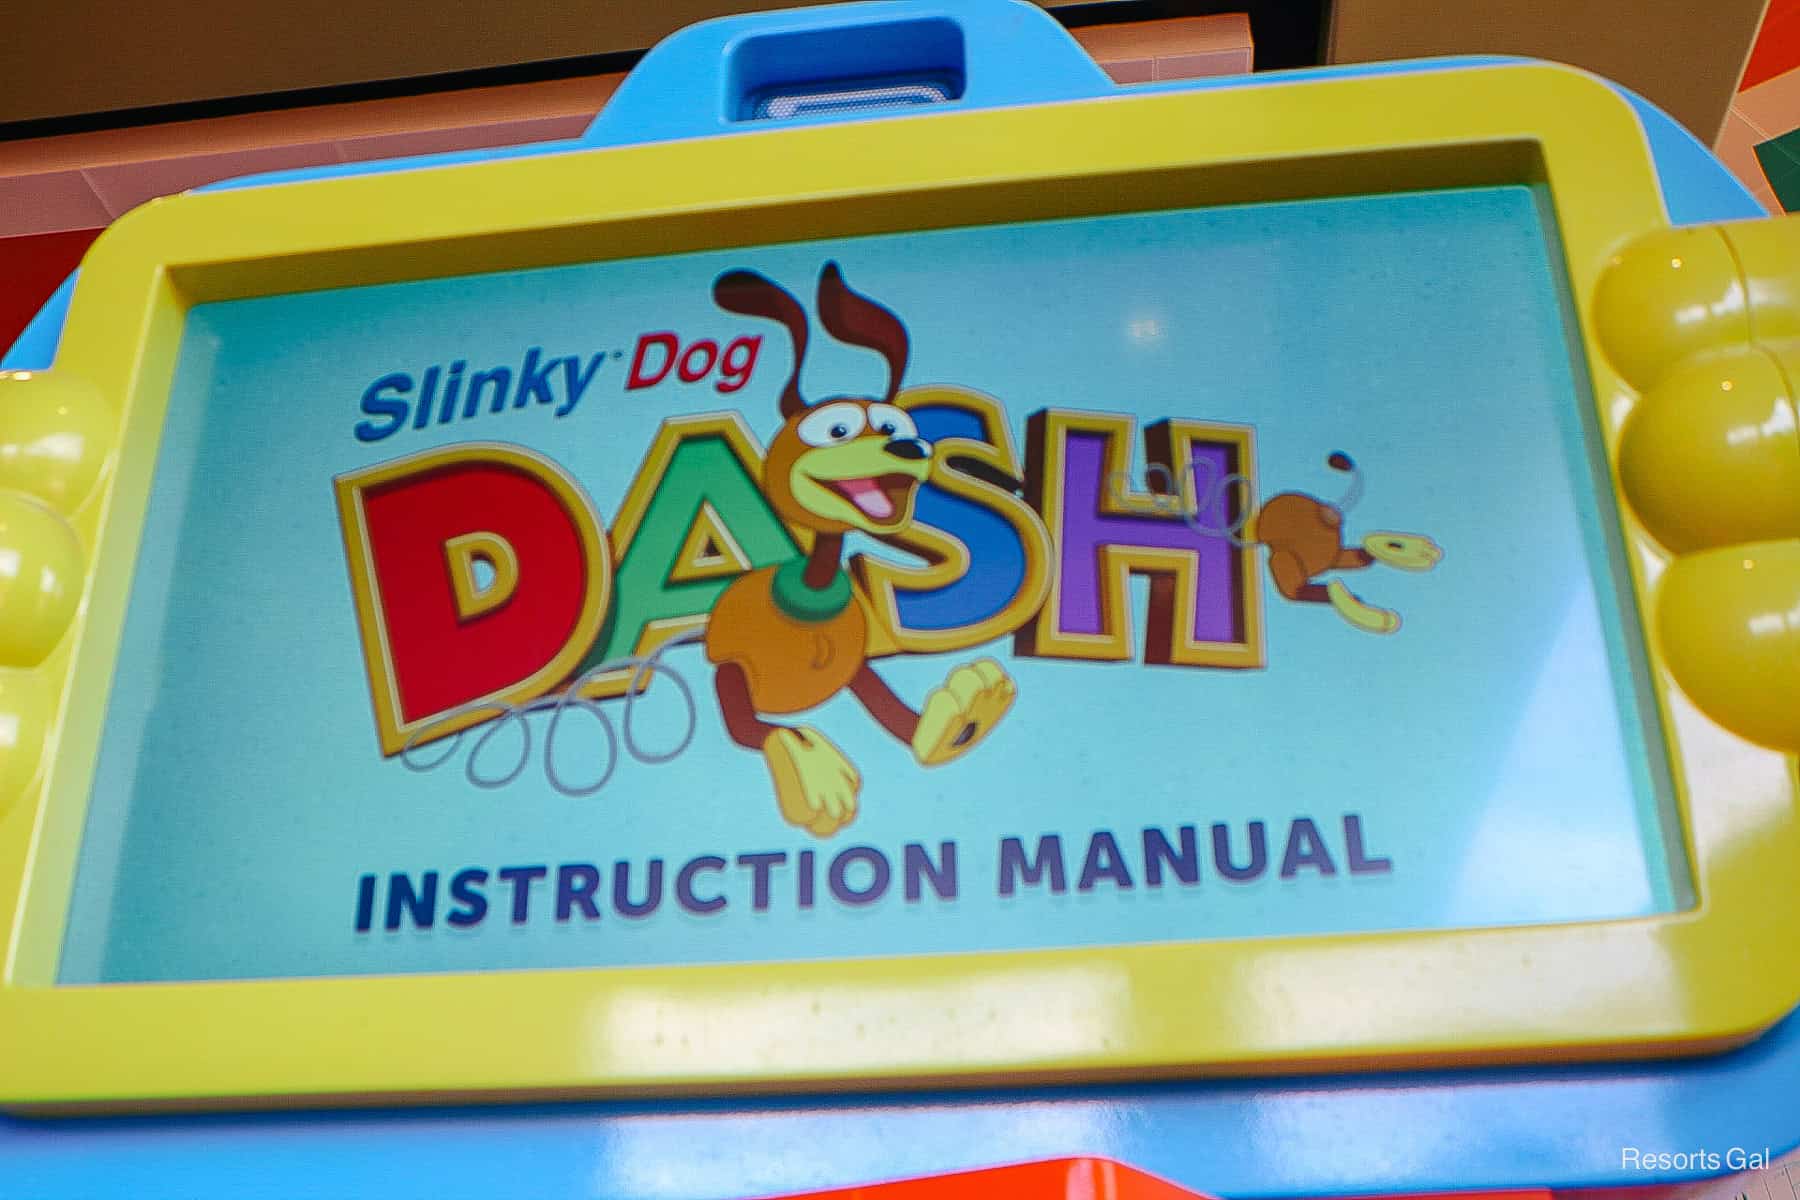 a queue element that says Slinky Dog Dash instruction manual 